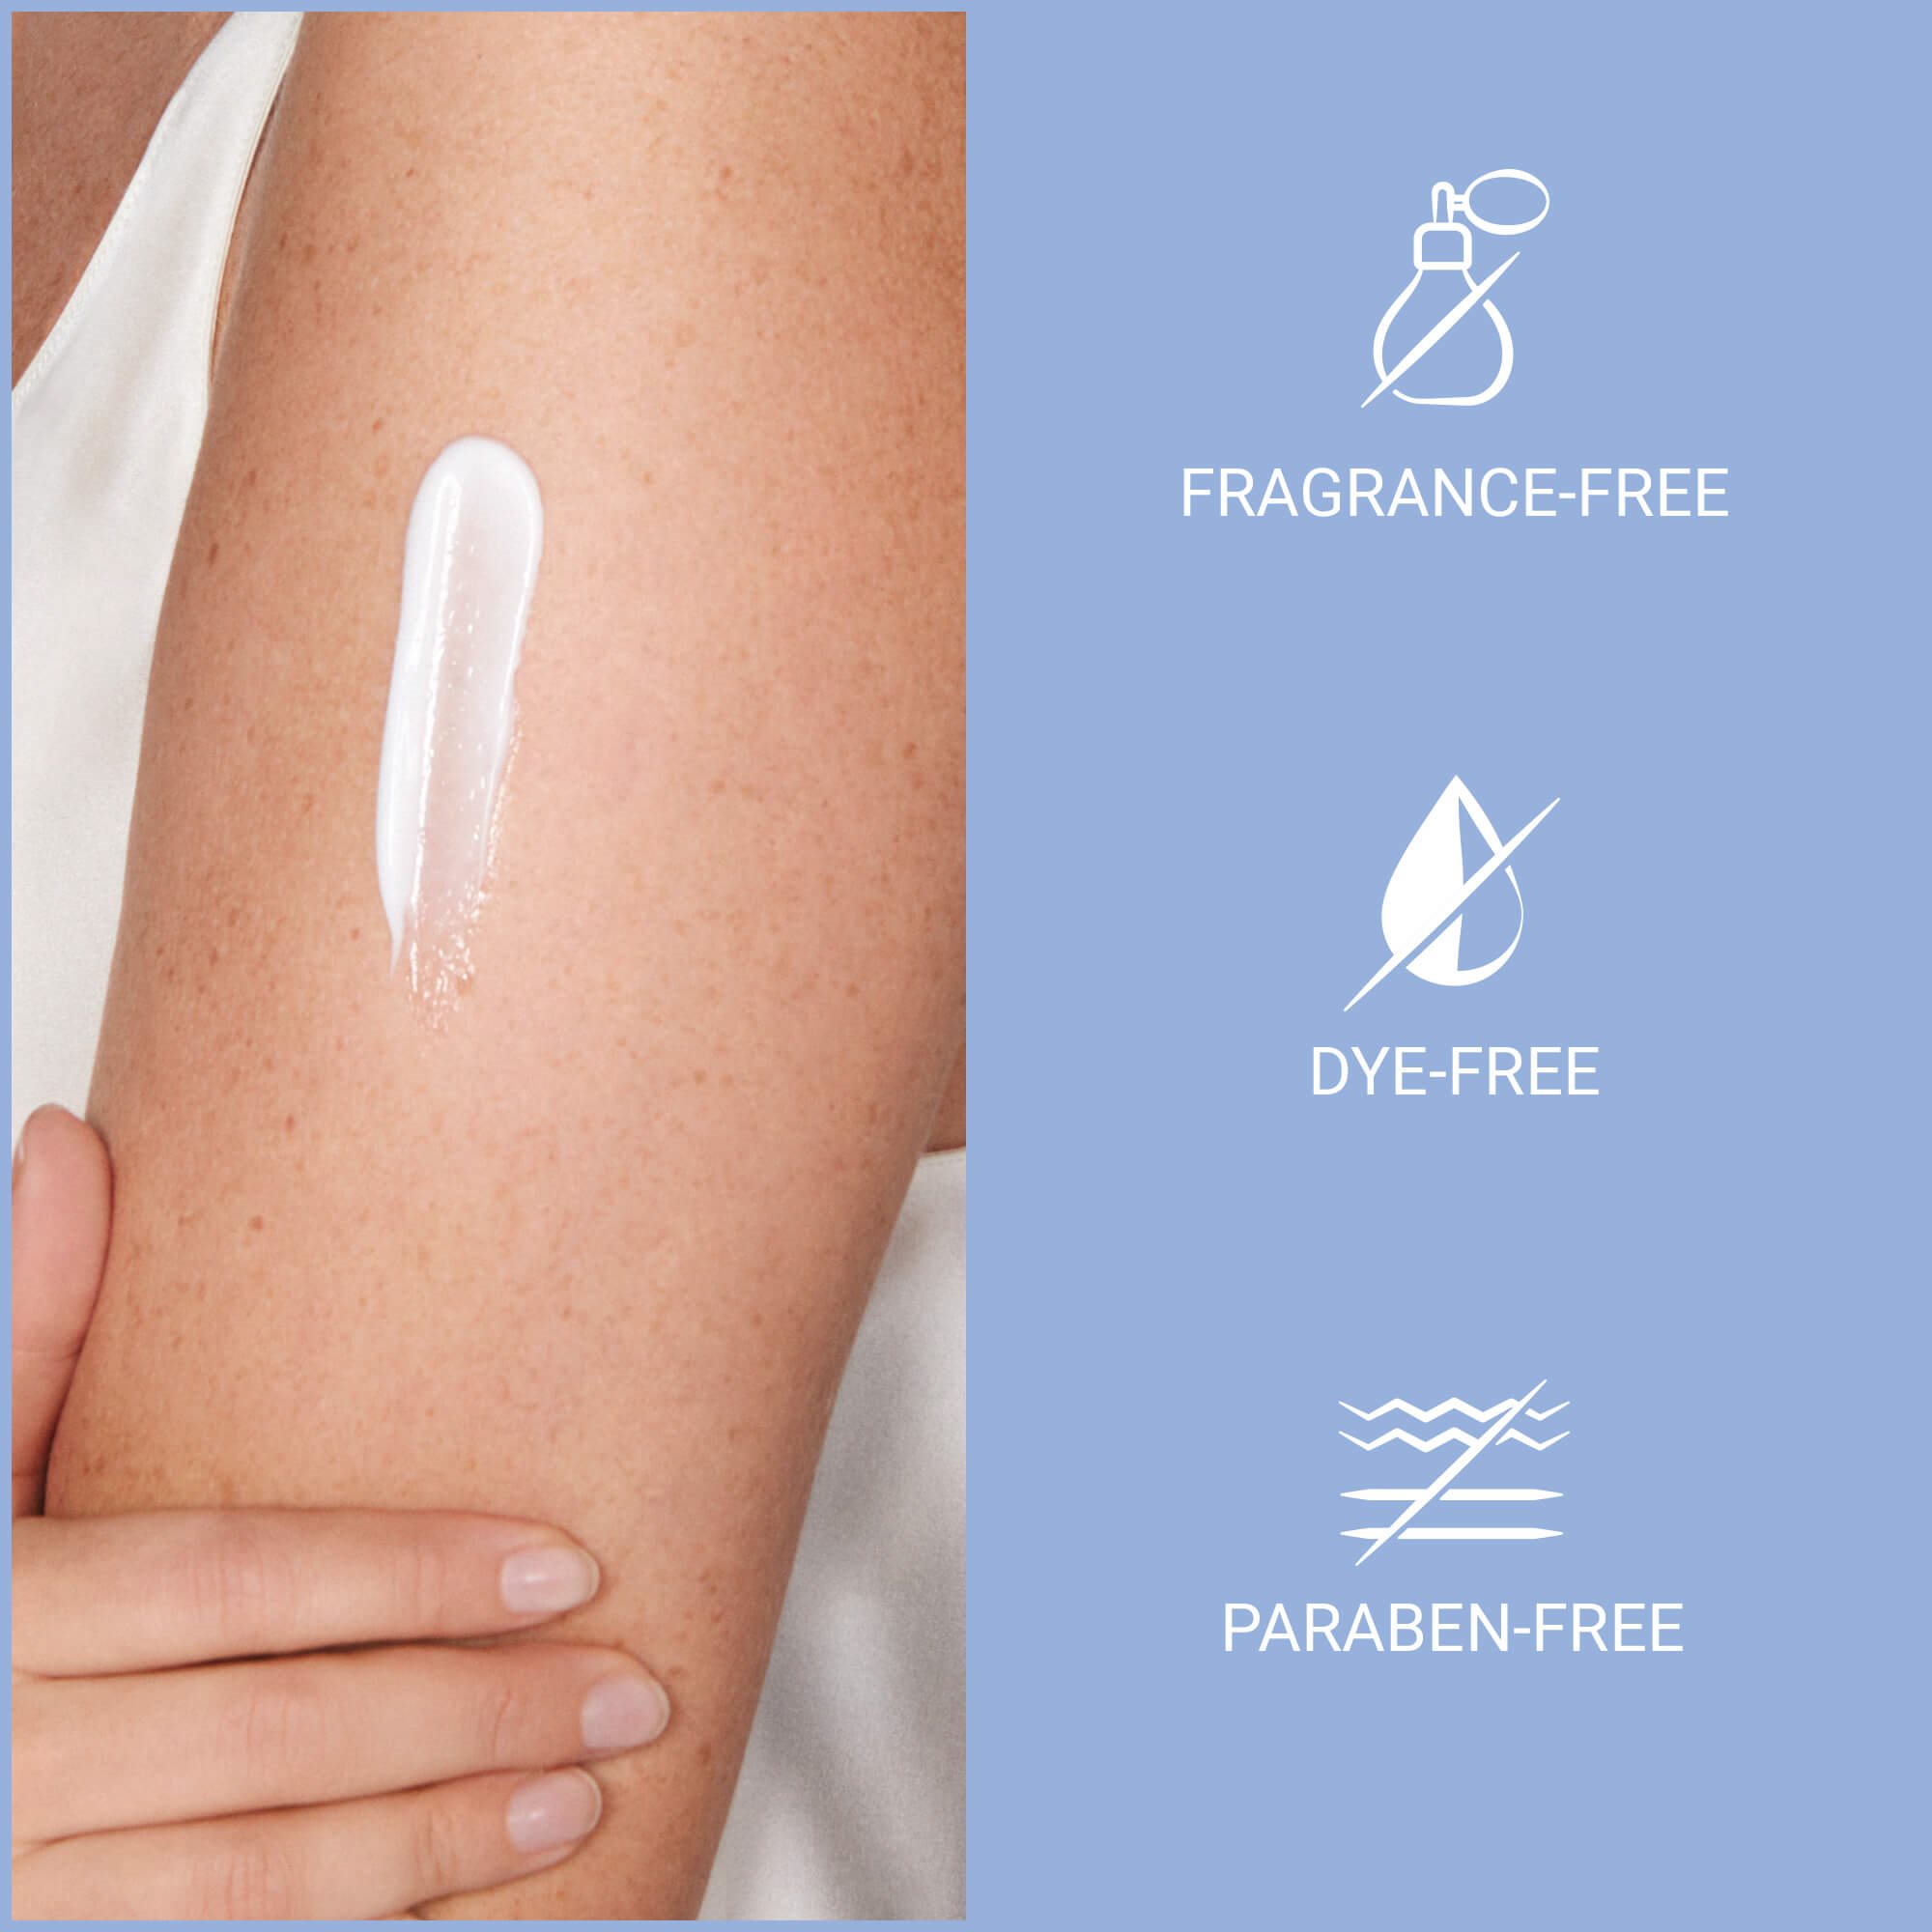 View of model with Eucerin Calming Lotion product smeared on left arm with product description text against a blue background.